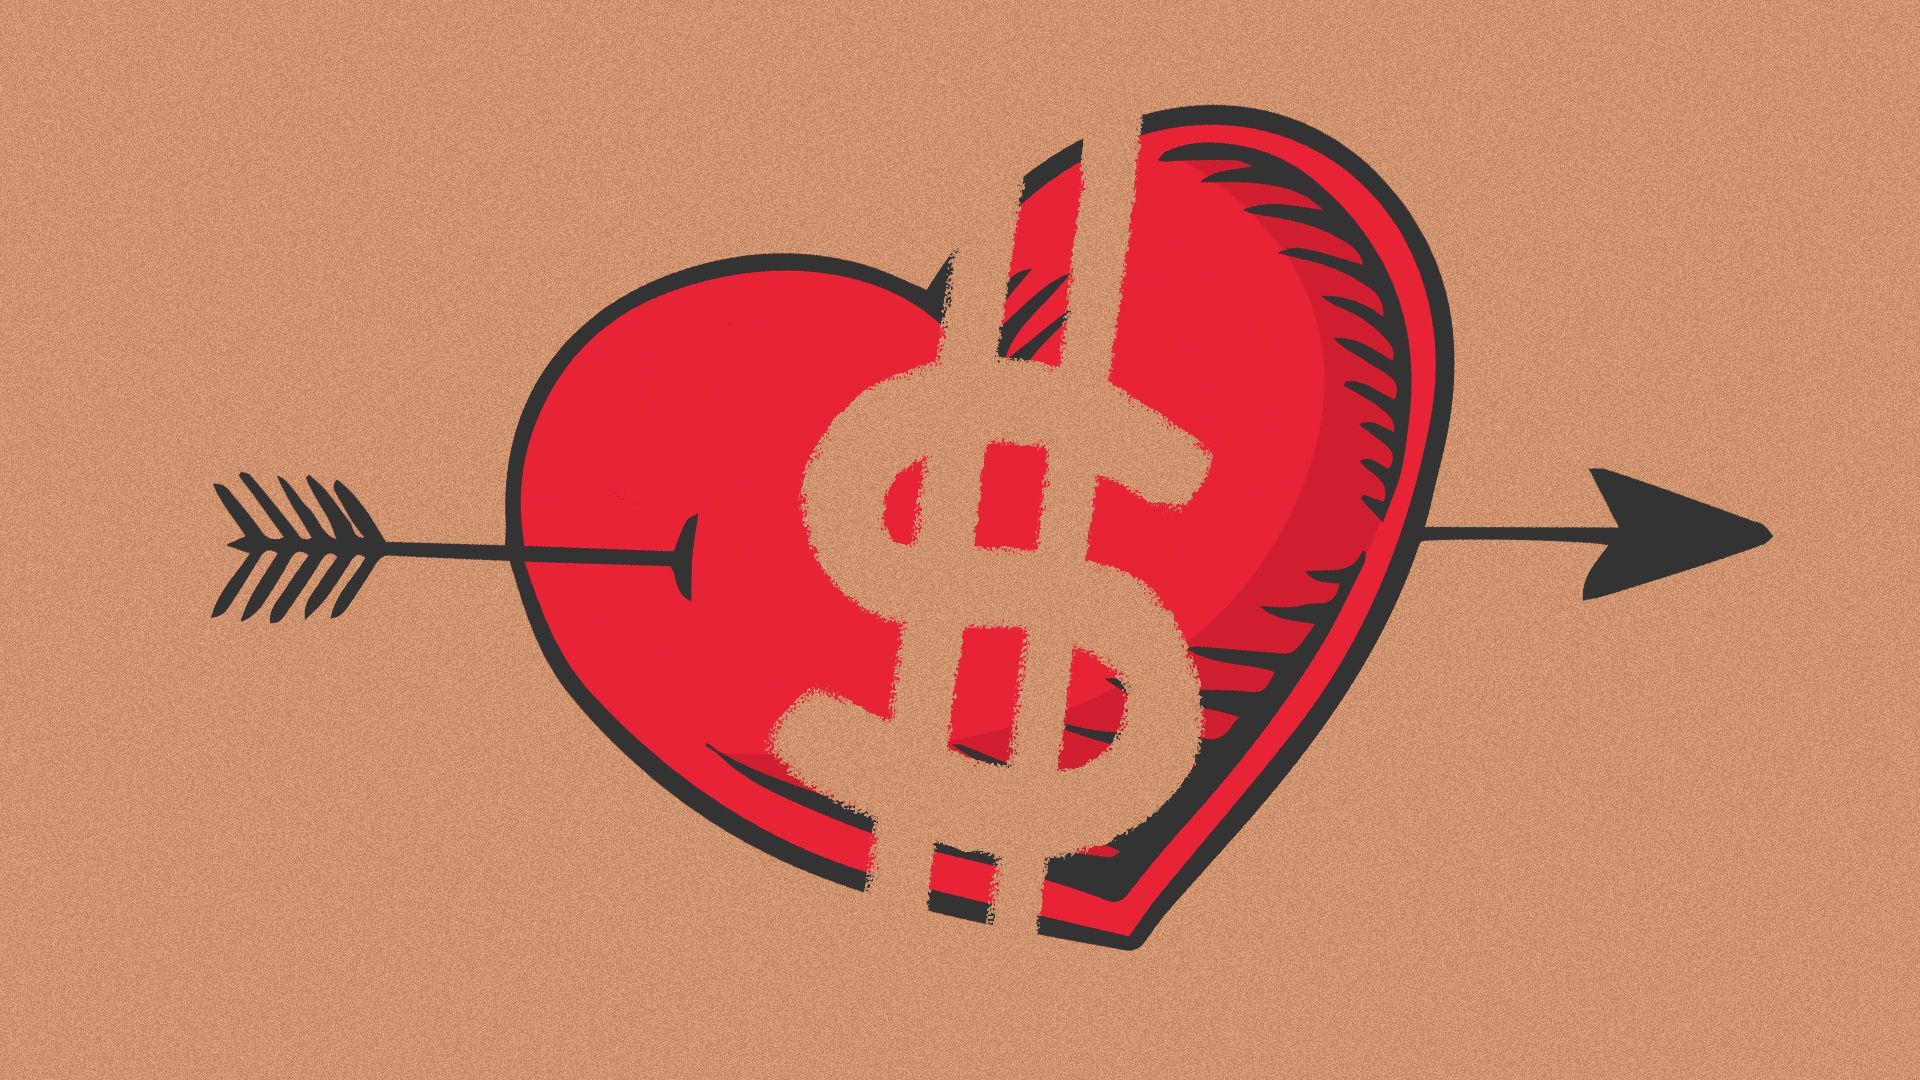 Illustration of a tattoo with a dollar sign erased from it.